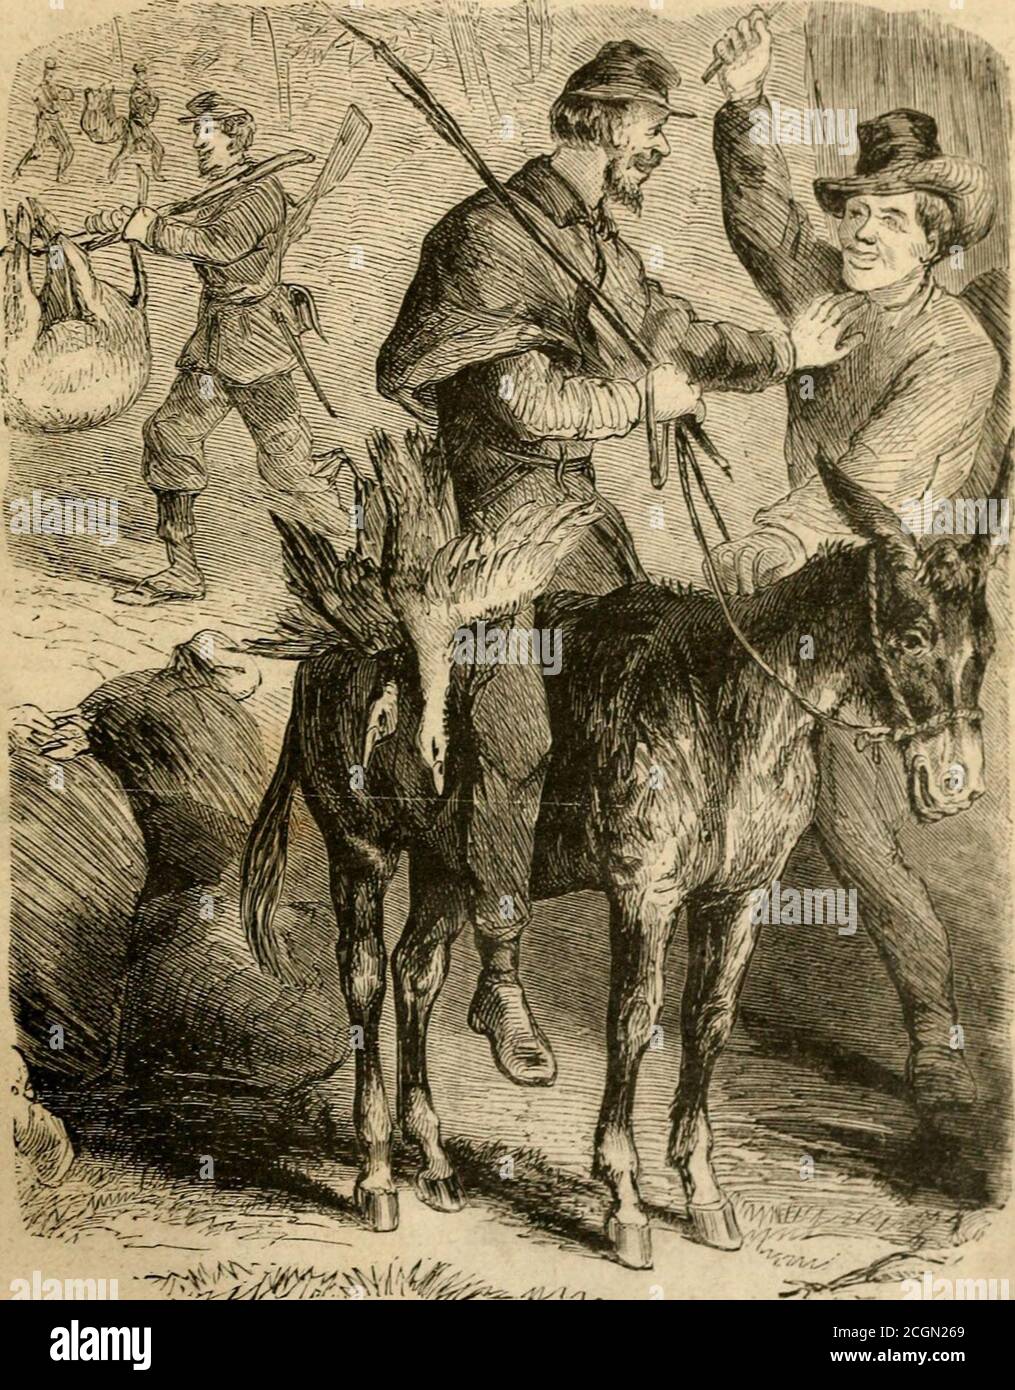 . Incidents of the Civil War in America . al. The illus-tration oppostte intelligibly sets forth the exploits of the soldiers; one mountedon a well-laden donkey who has docility portrayed in his demure countenance,the other alongside having been paying a visit to the poultry-yard of the rebelfarmer. In war, might constitutes right. The boys are elated at theirsuccess, and if we may judge from the hilarity and good nature which is so ! I m: I l II. W K IN A.MKKK . 0 faithfully illustrated in the sketch, wo may be fully assured iliai tli. prospa Iof dining on the fruits of their legalized poa Stock Photo